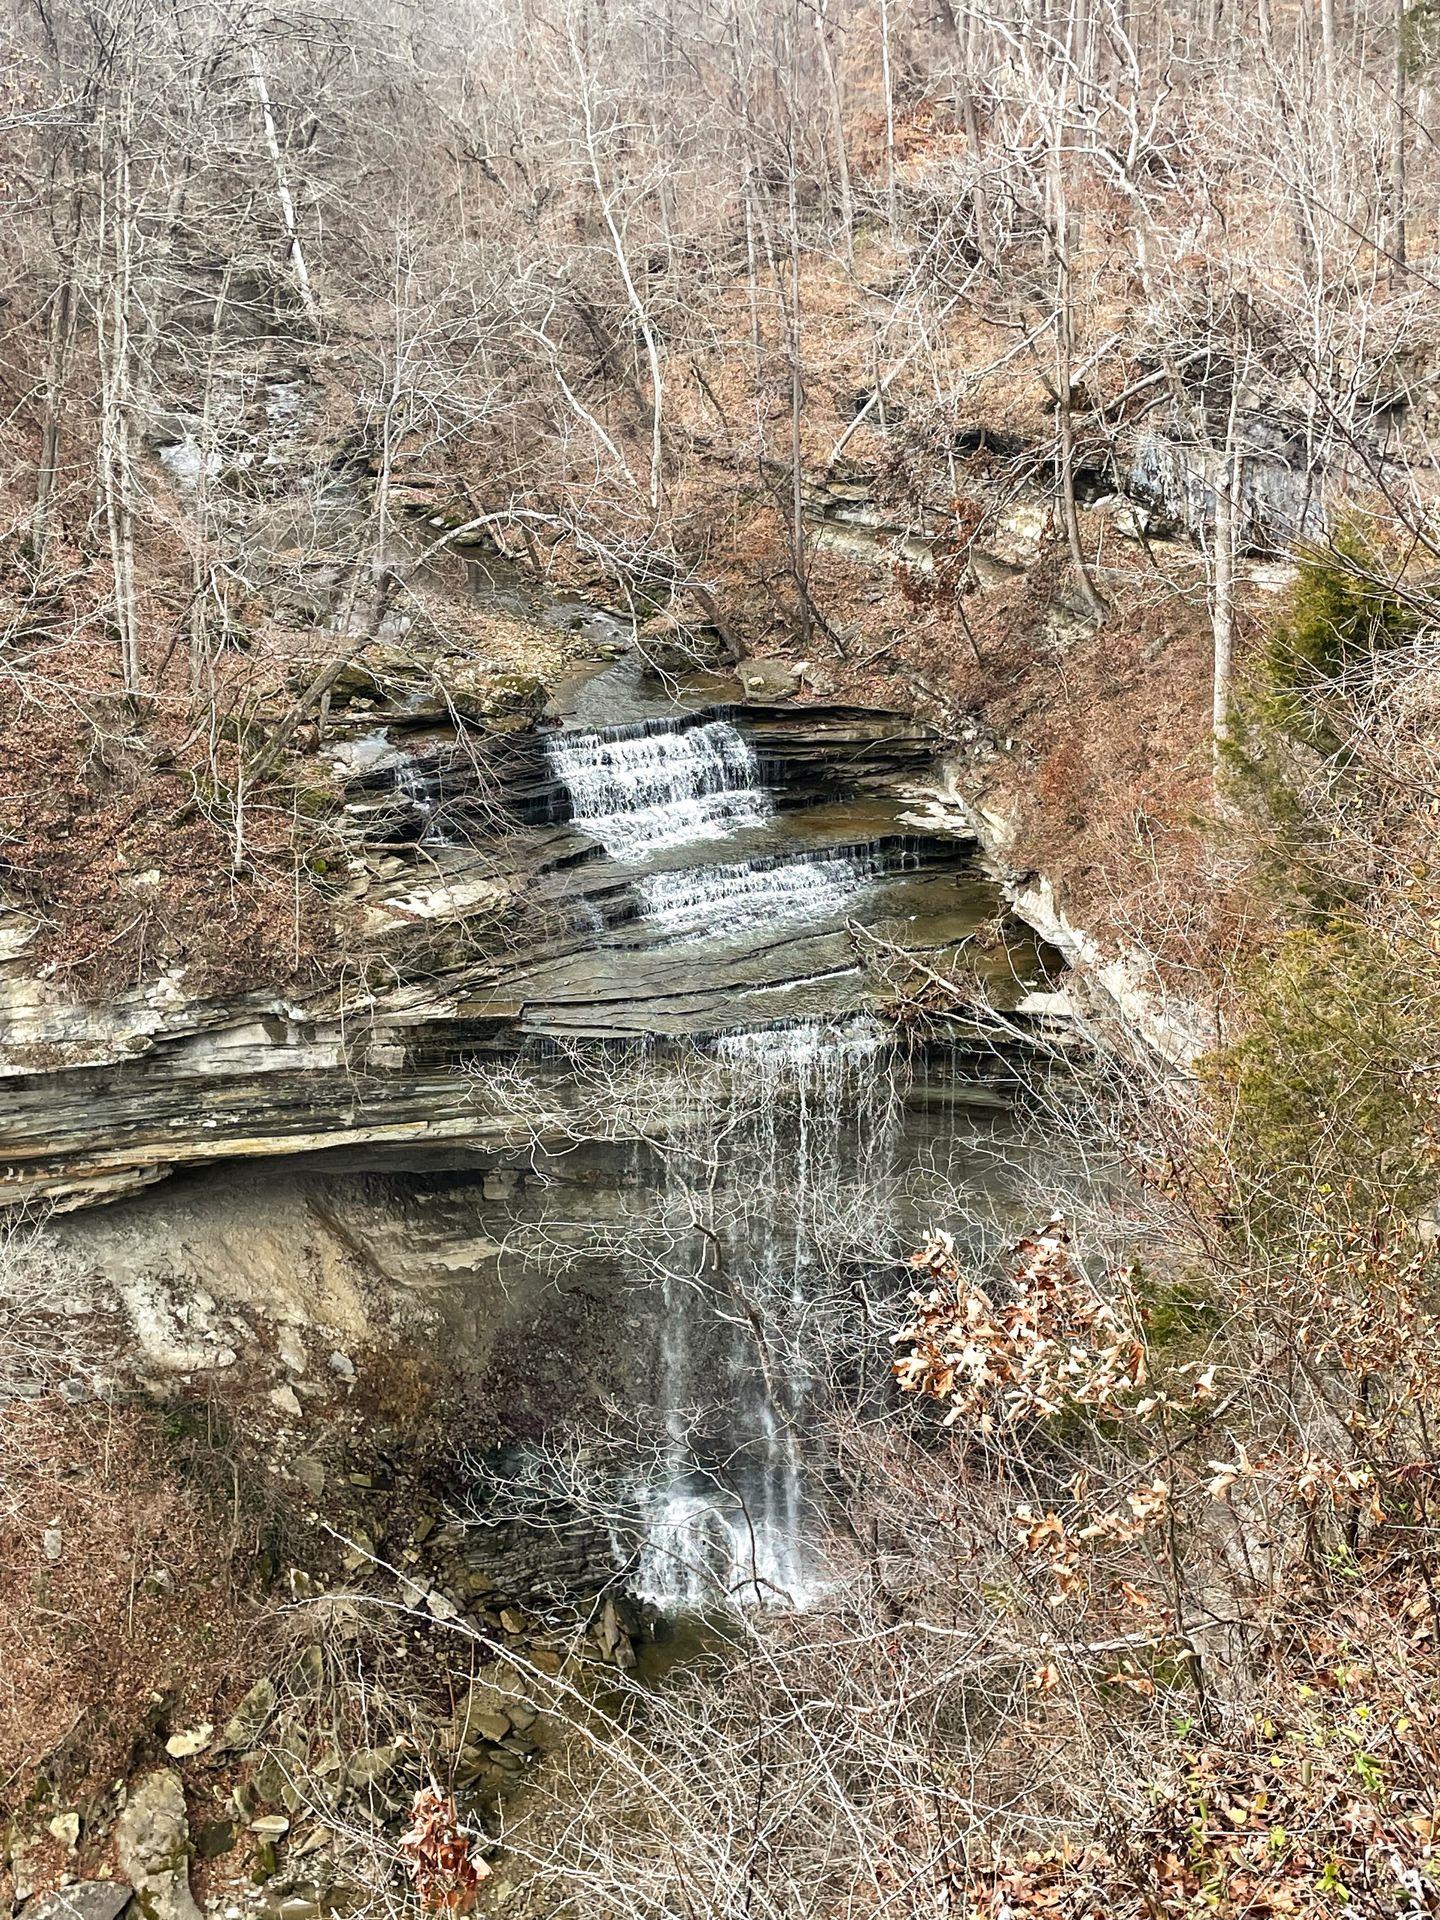 An overlook looking down at a waterfall in Clifty Falls State Park.